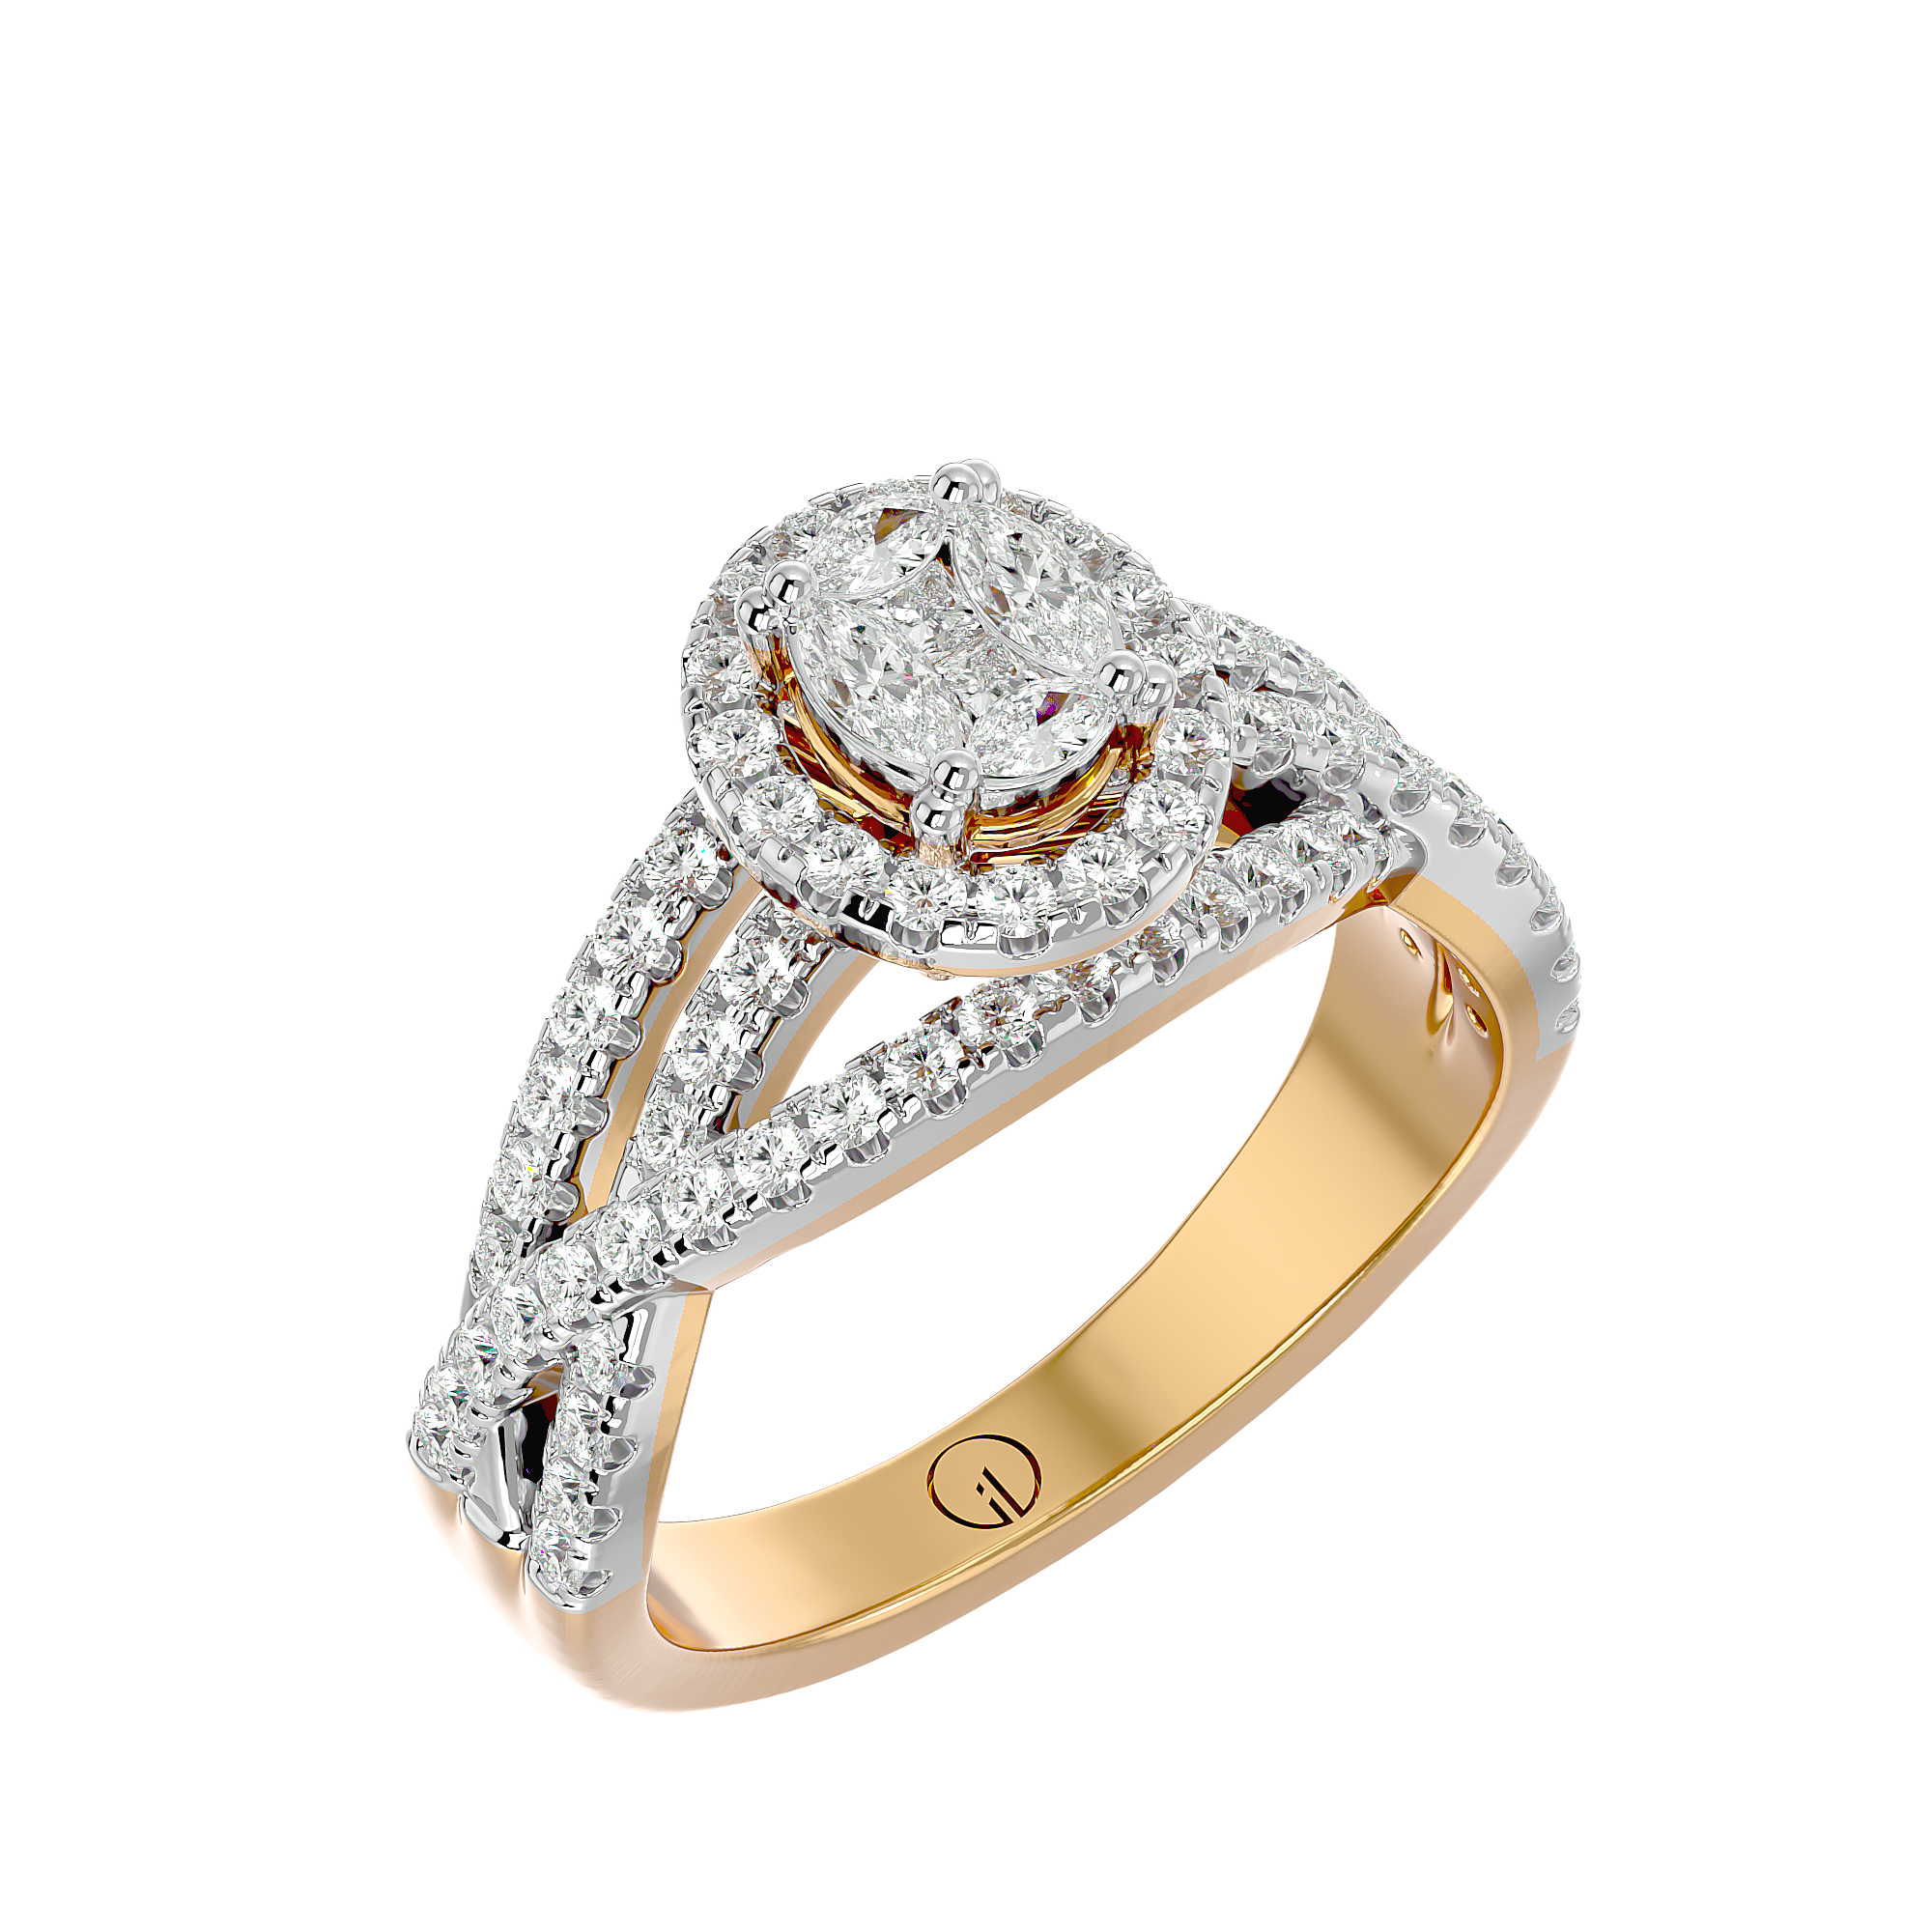 Ornate Oval Solitaire Illusion Diamond Ring made from VVS EF diamond quality with 0.87 carat diamonds